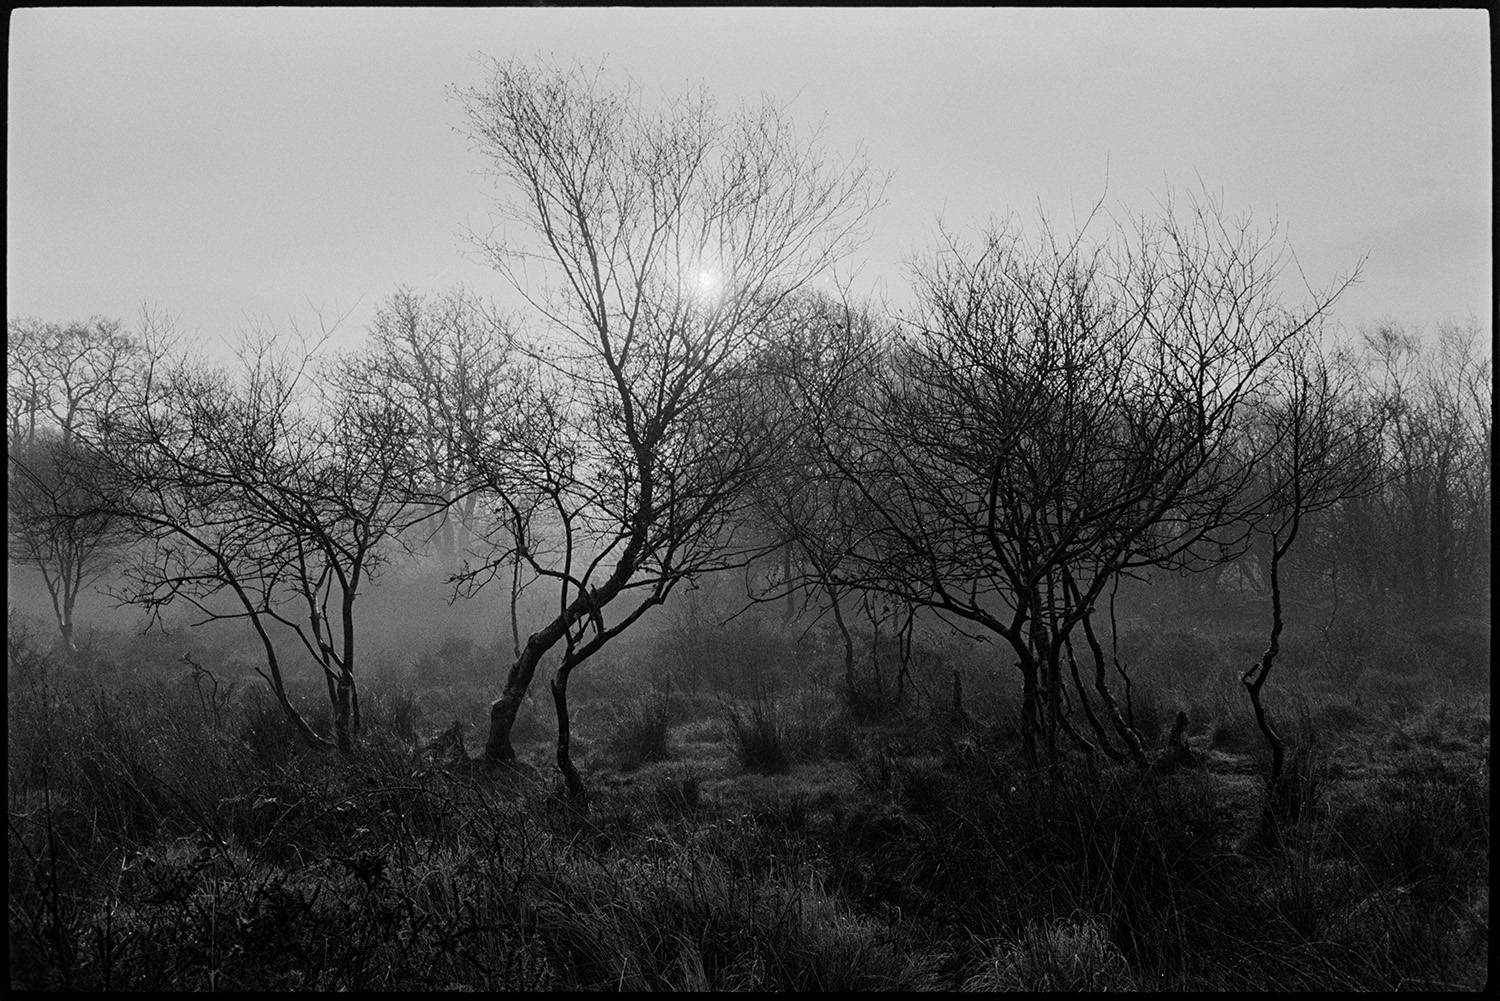 Moor, early sun through trees.
[Silhouetted trees on a misty morning on Hollocombe Moor.]